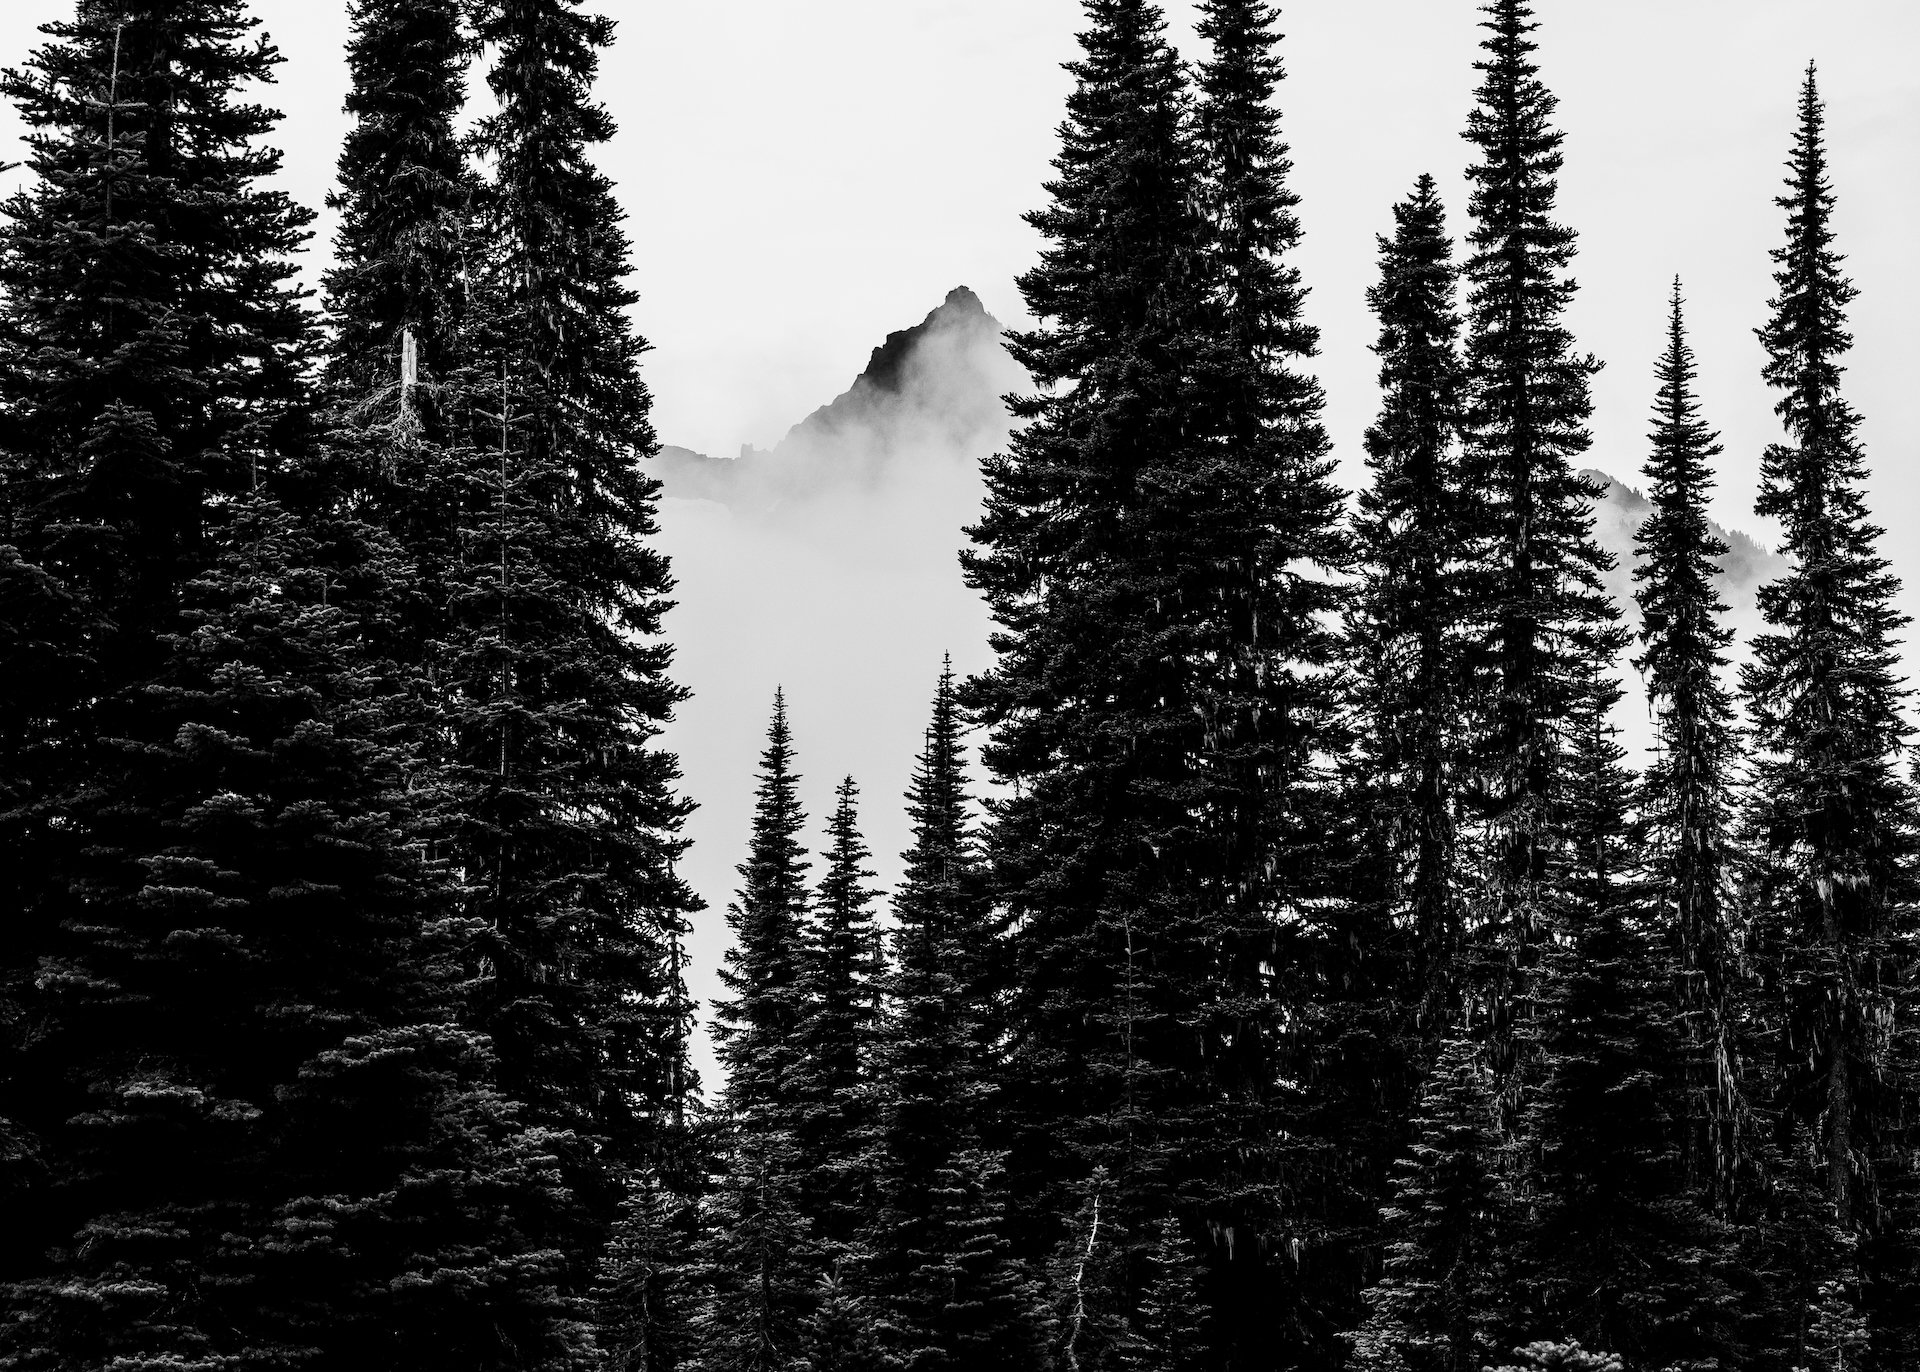  The forests and the Tatoosh Range. We were supposed to climb up there, but the weather did not cooperate.  